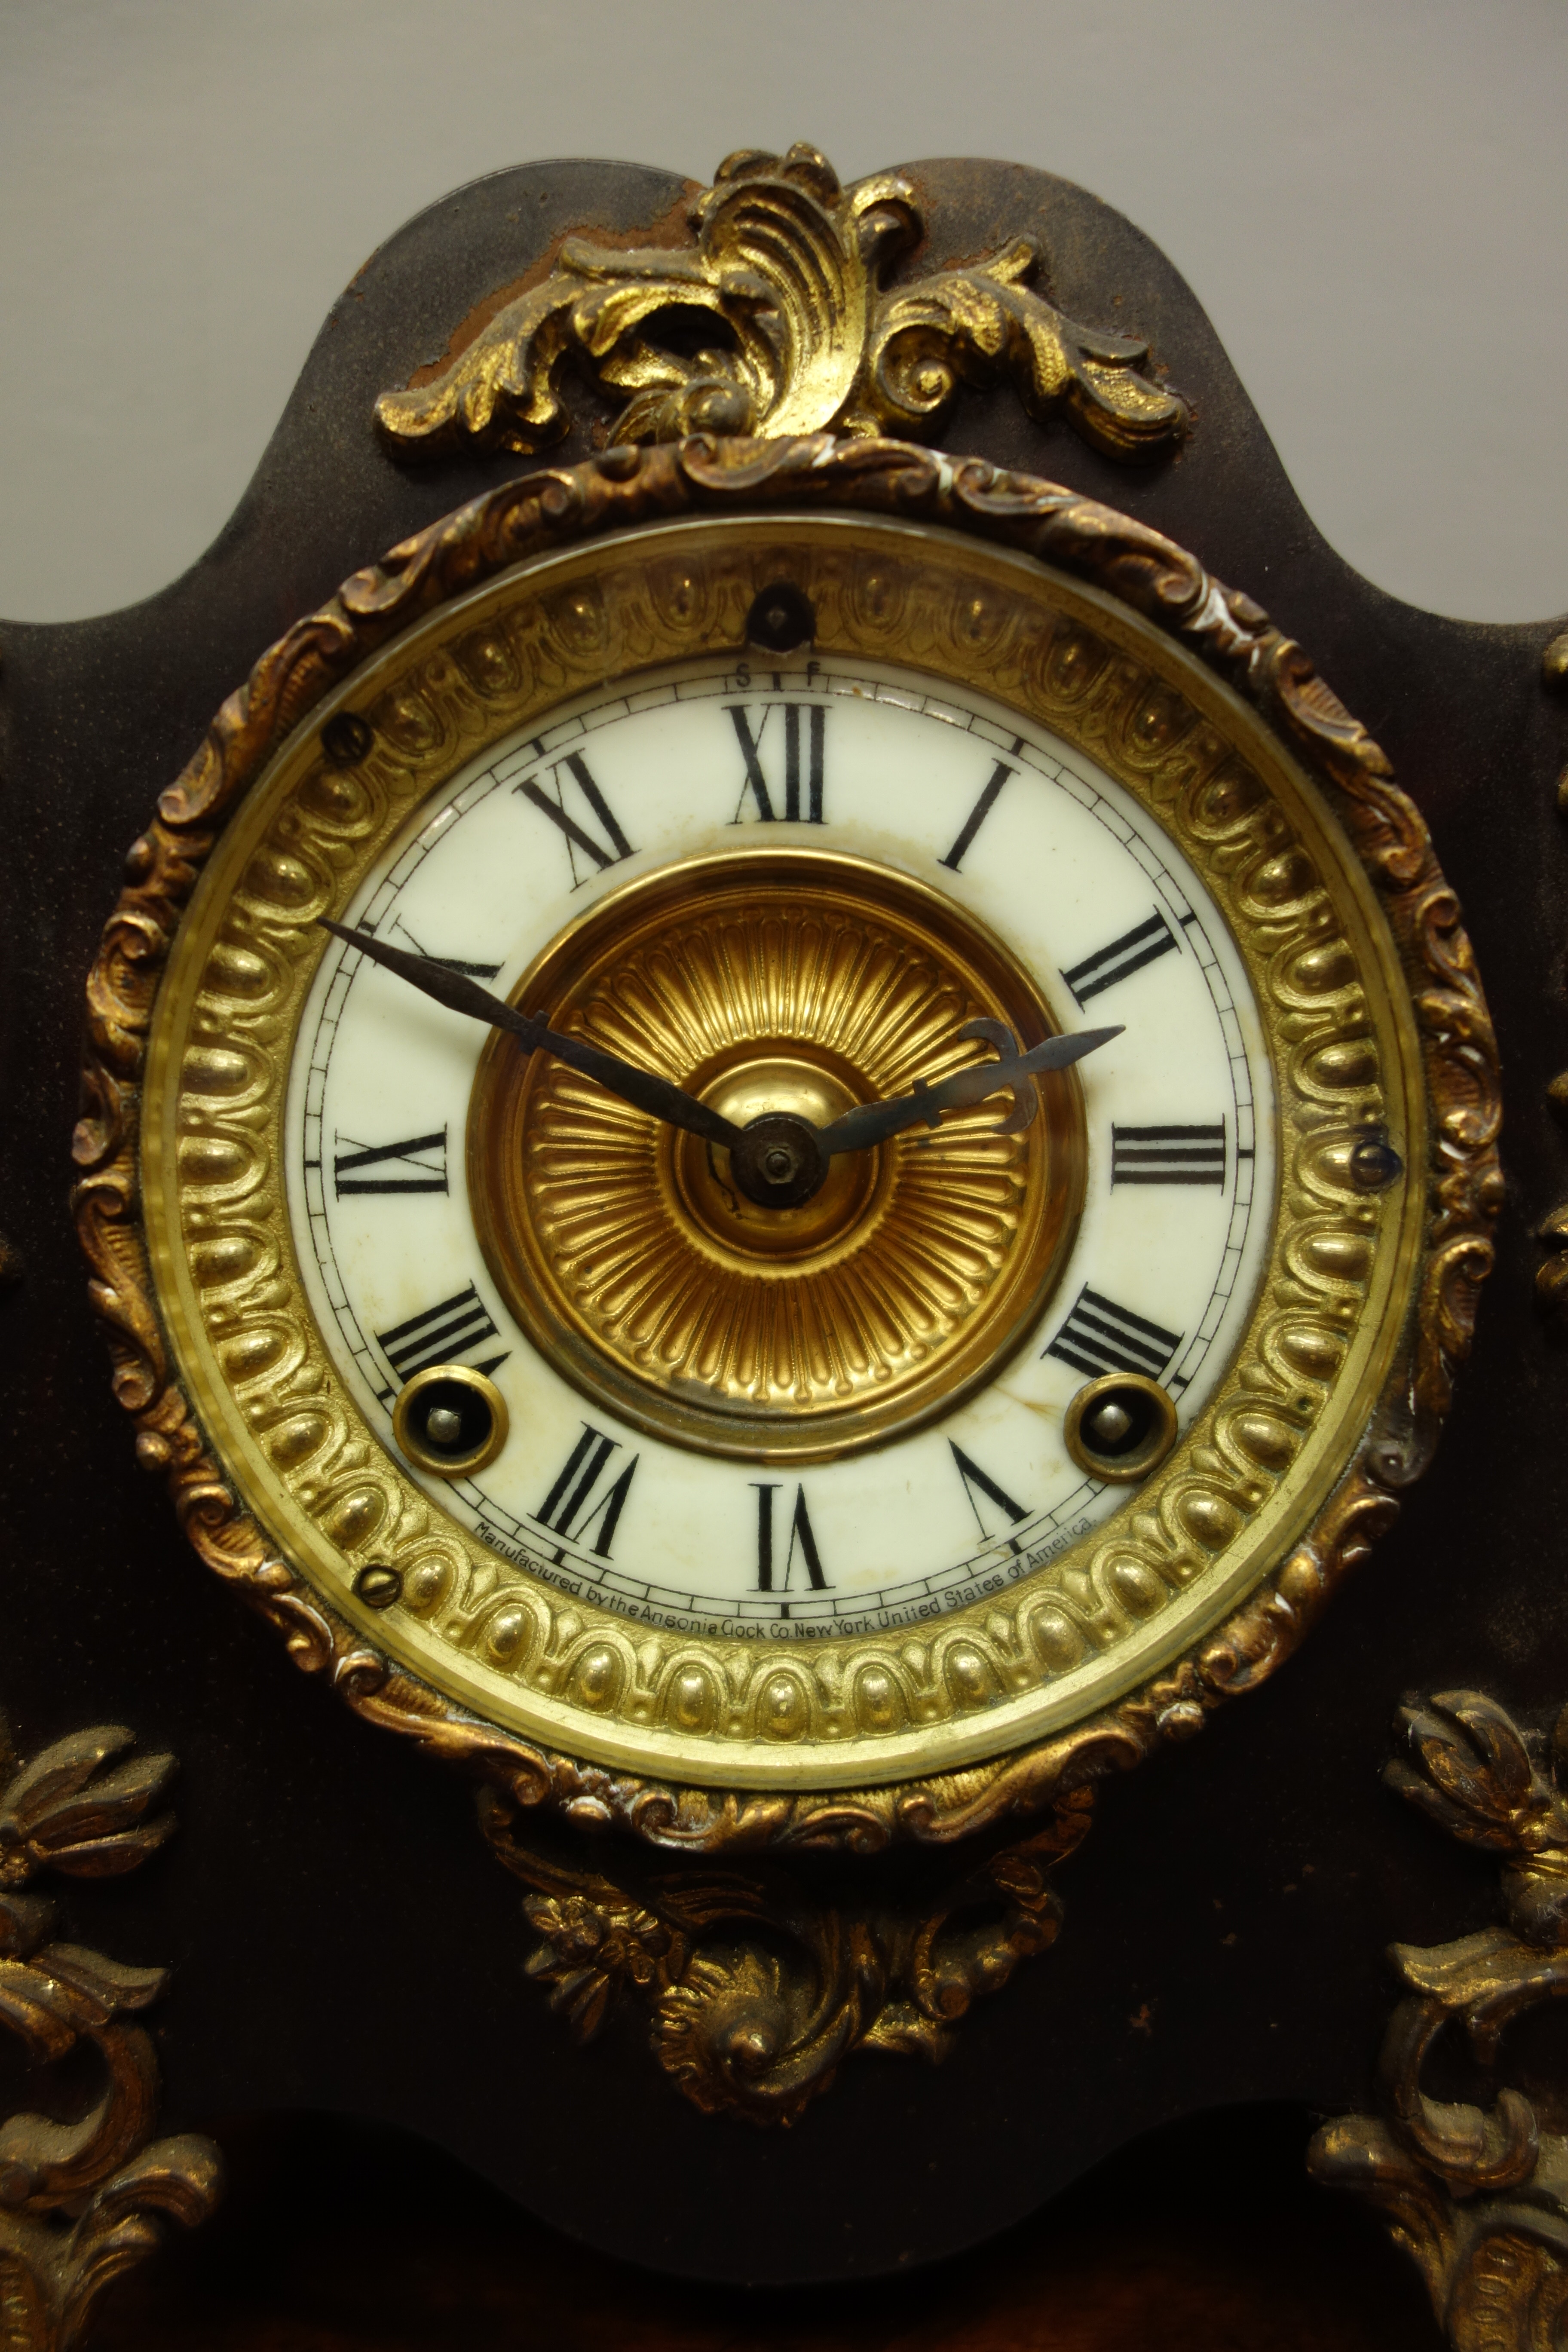 Late19th century ornate cartouche shaped mantel clock by 'Ansonia Clock Co. - Image 2 of 2